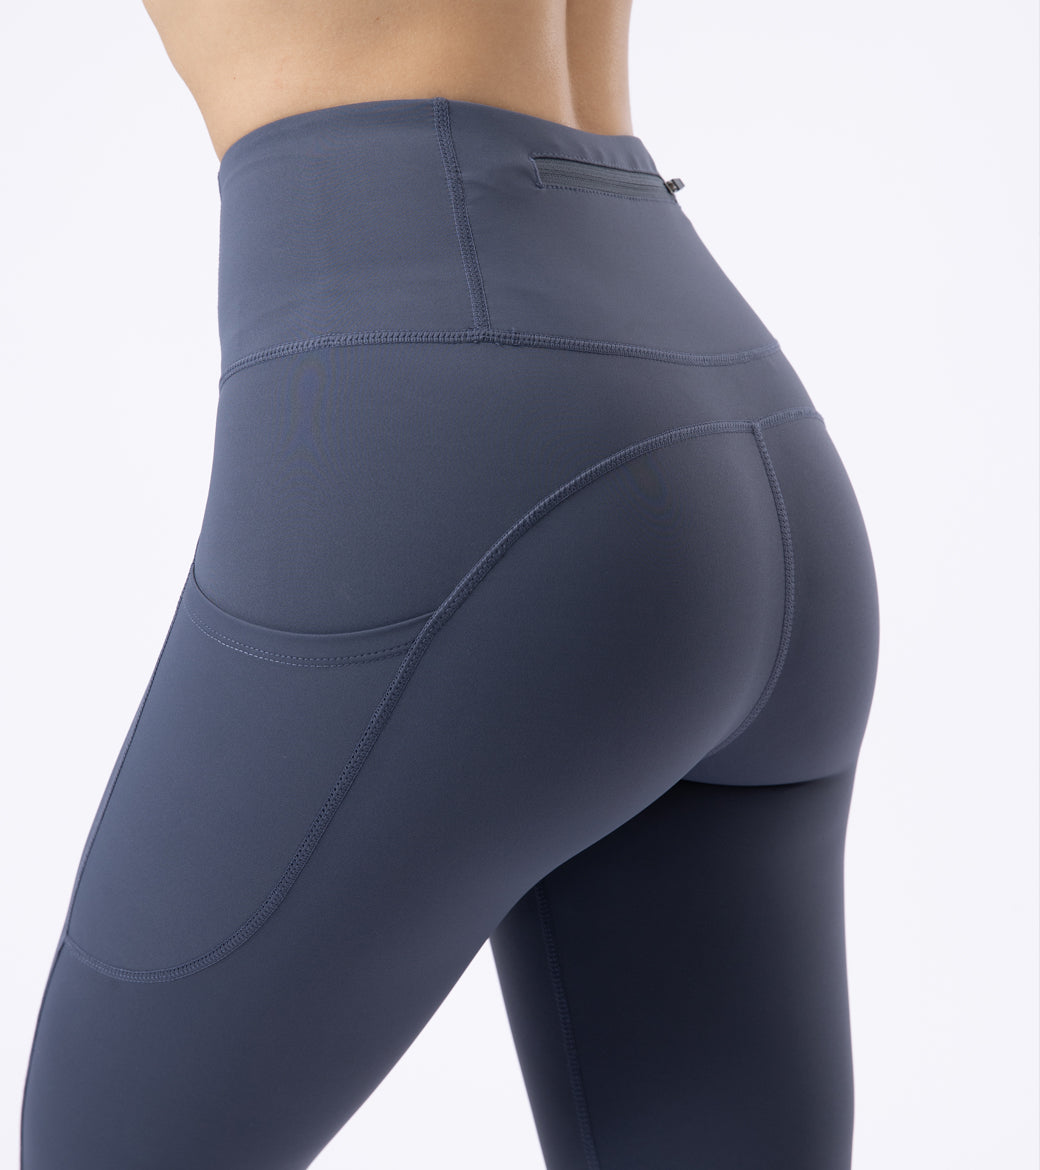 LOVESOFT Womens Grey Blue High Waisted Leggings Workout Side Pockets Squat Proof Tummy Control